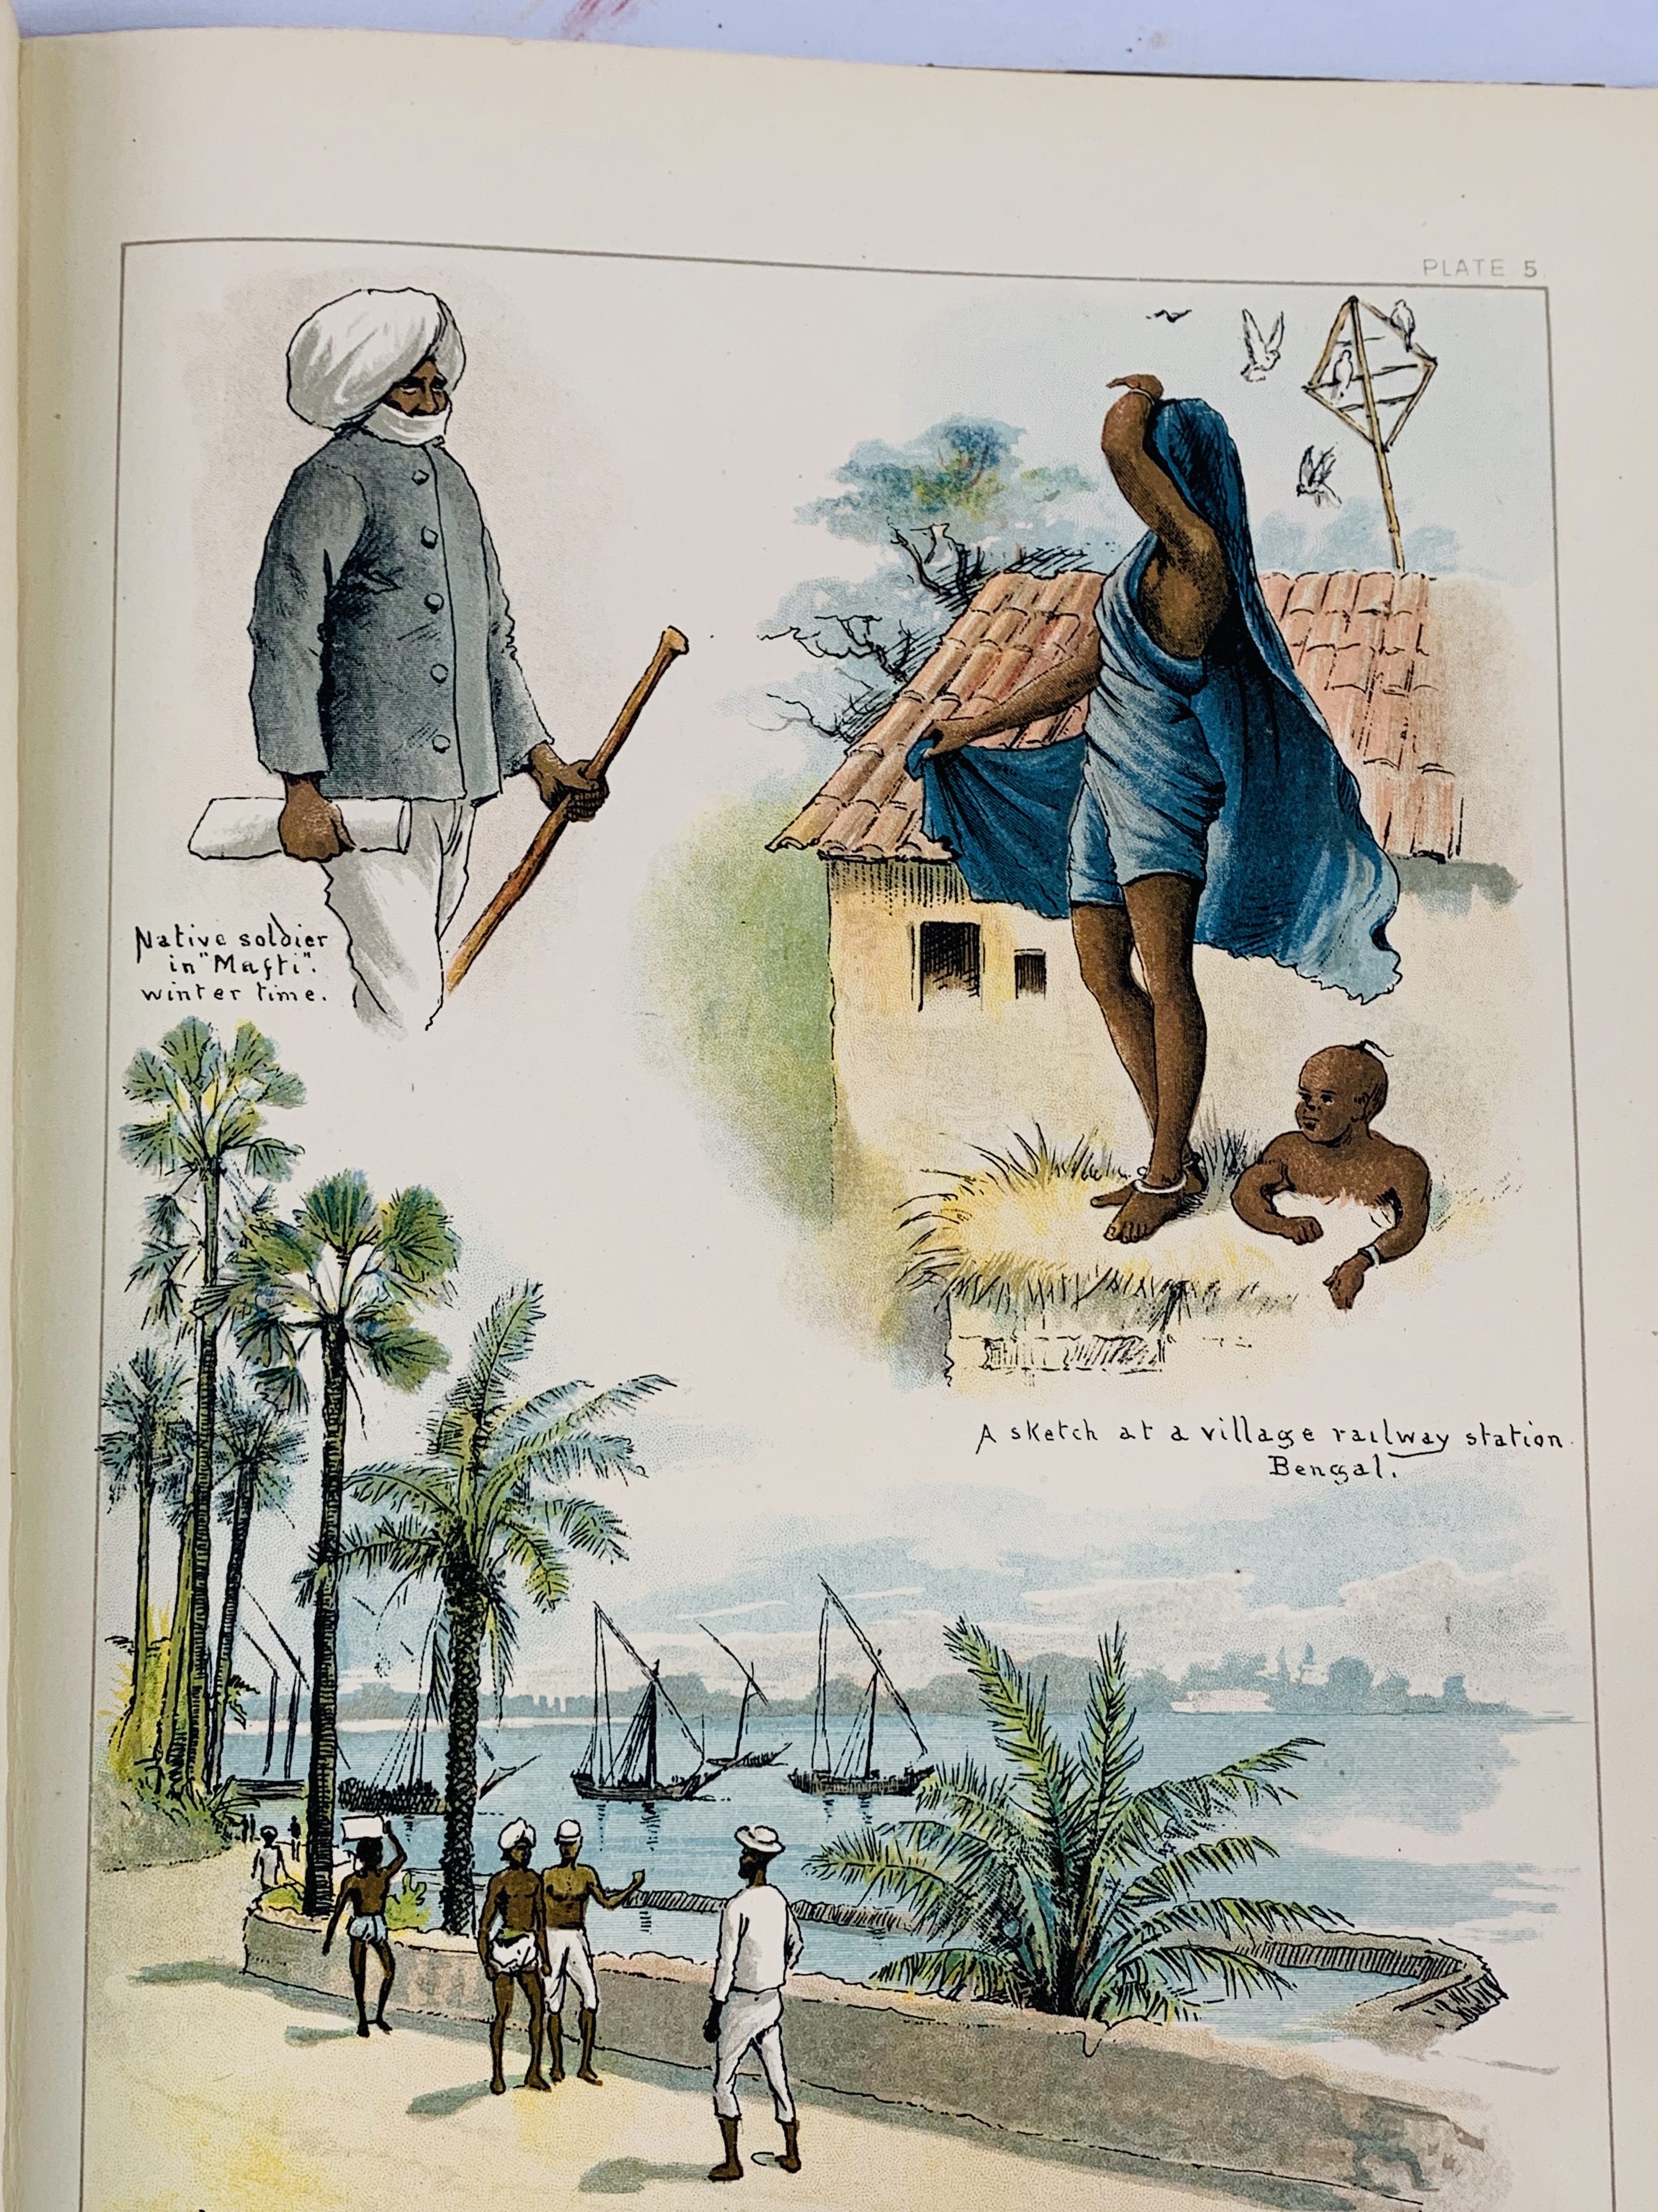 Lloyd's Sketches of Indian Life, published by Chapman and Hall, 1890 - Image 2 of 5